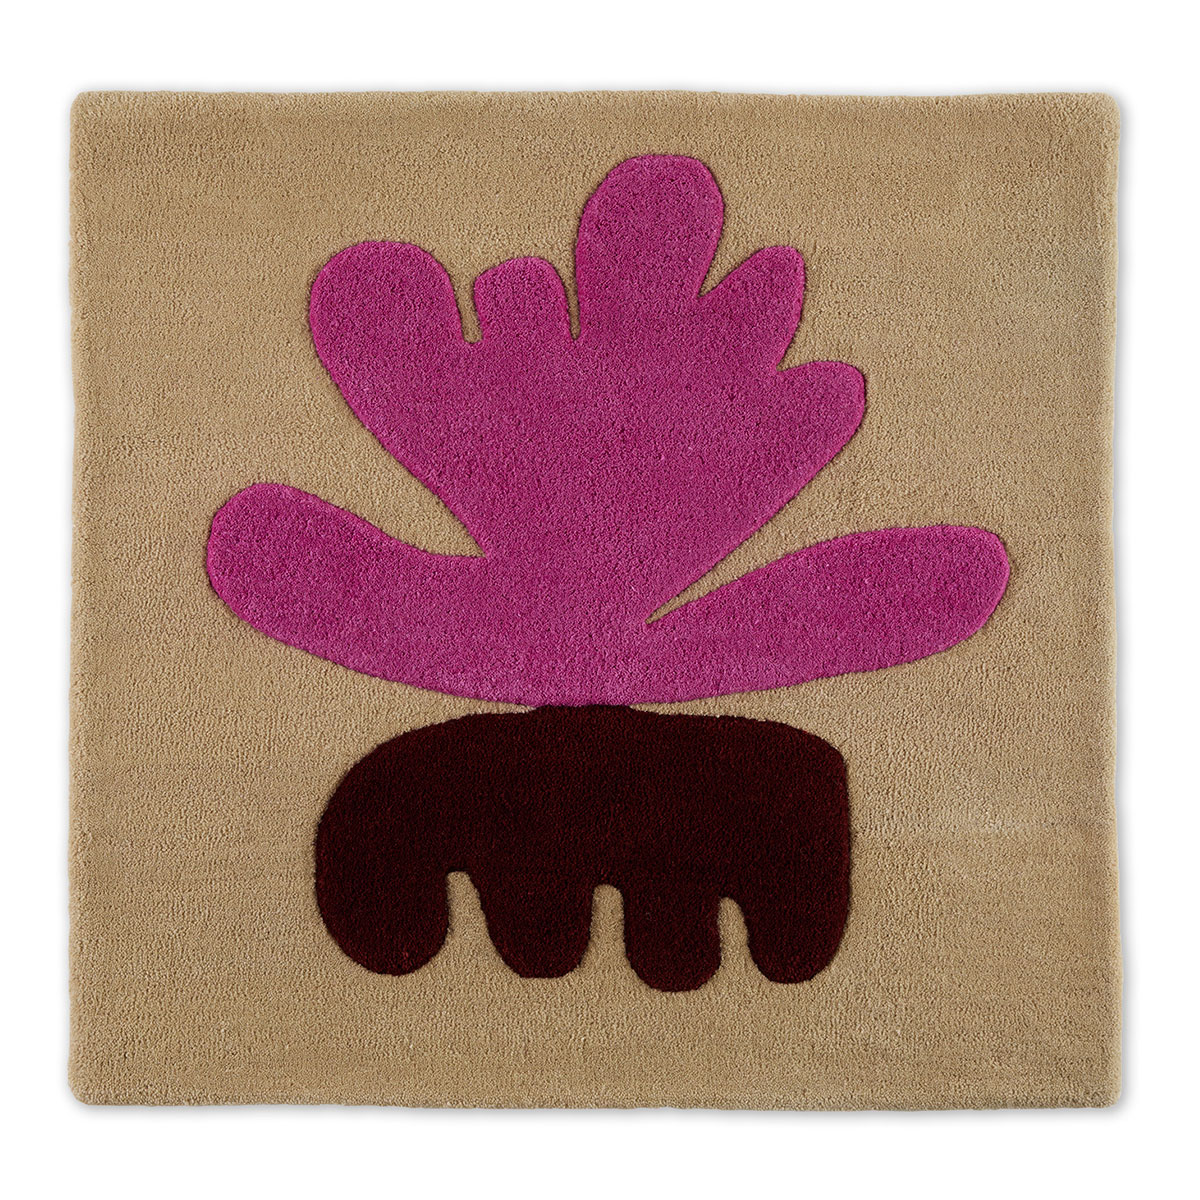 An abstract tan, pink, and brown rug named Seaflower Rugosa.